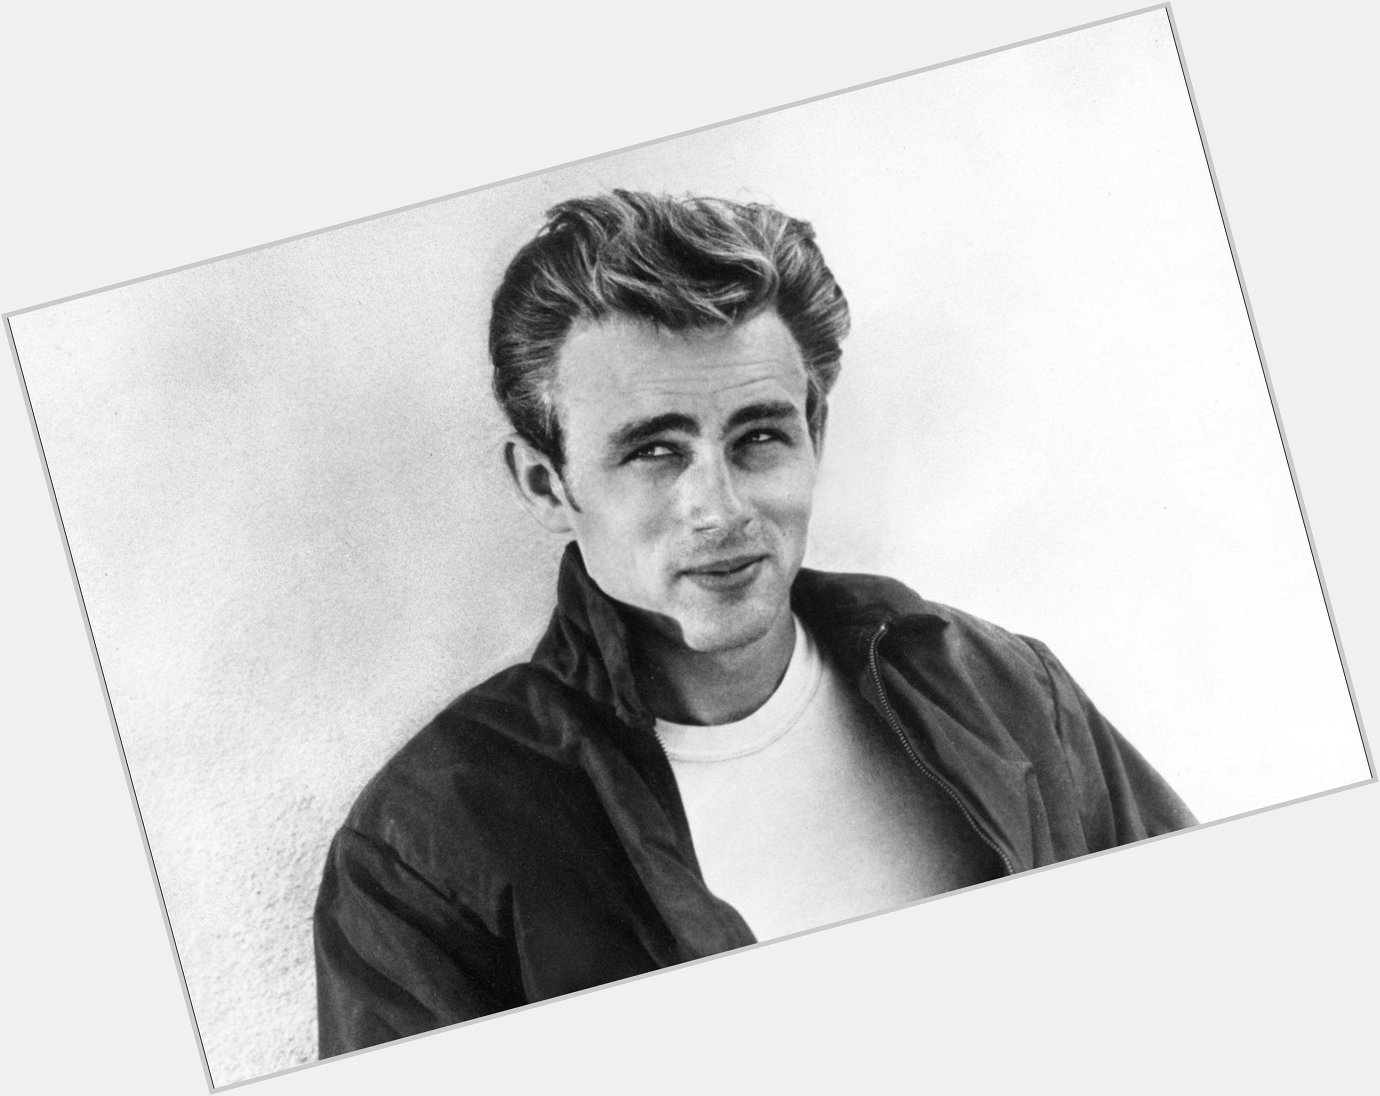 Happy Birthday James Dean! Here is a recent post on East of Eden  